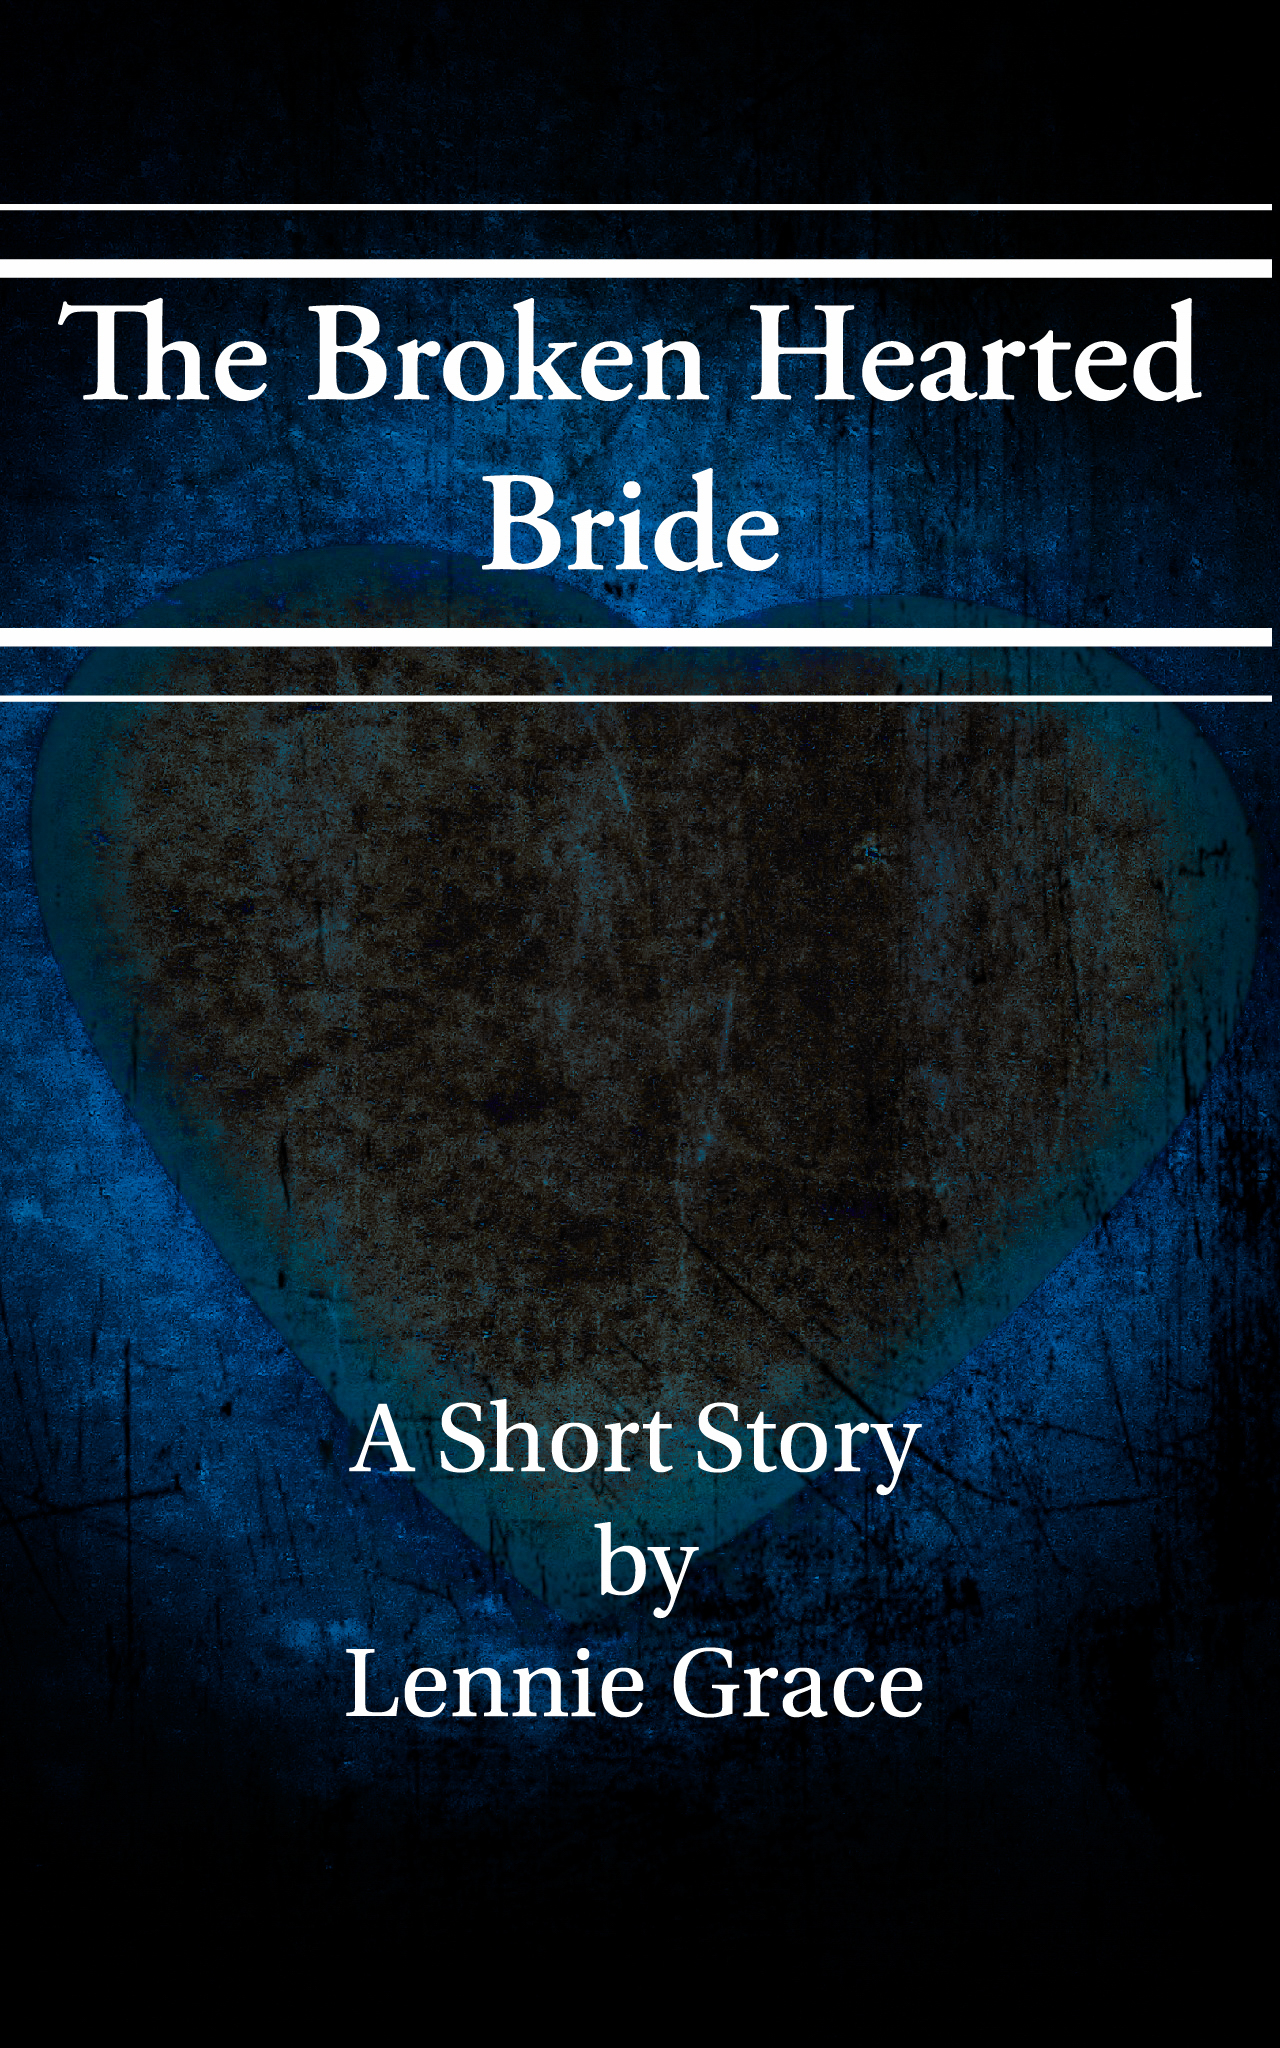 FREE: The Broken Hearted Bride by Lennie Grace